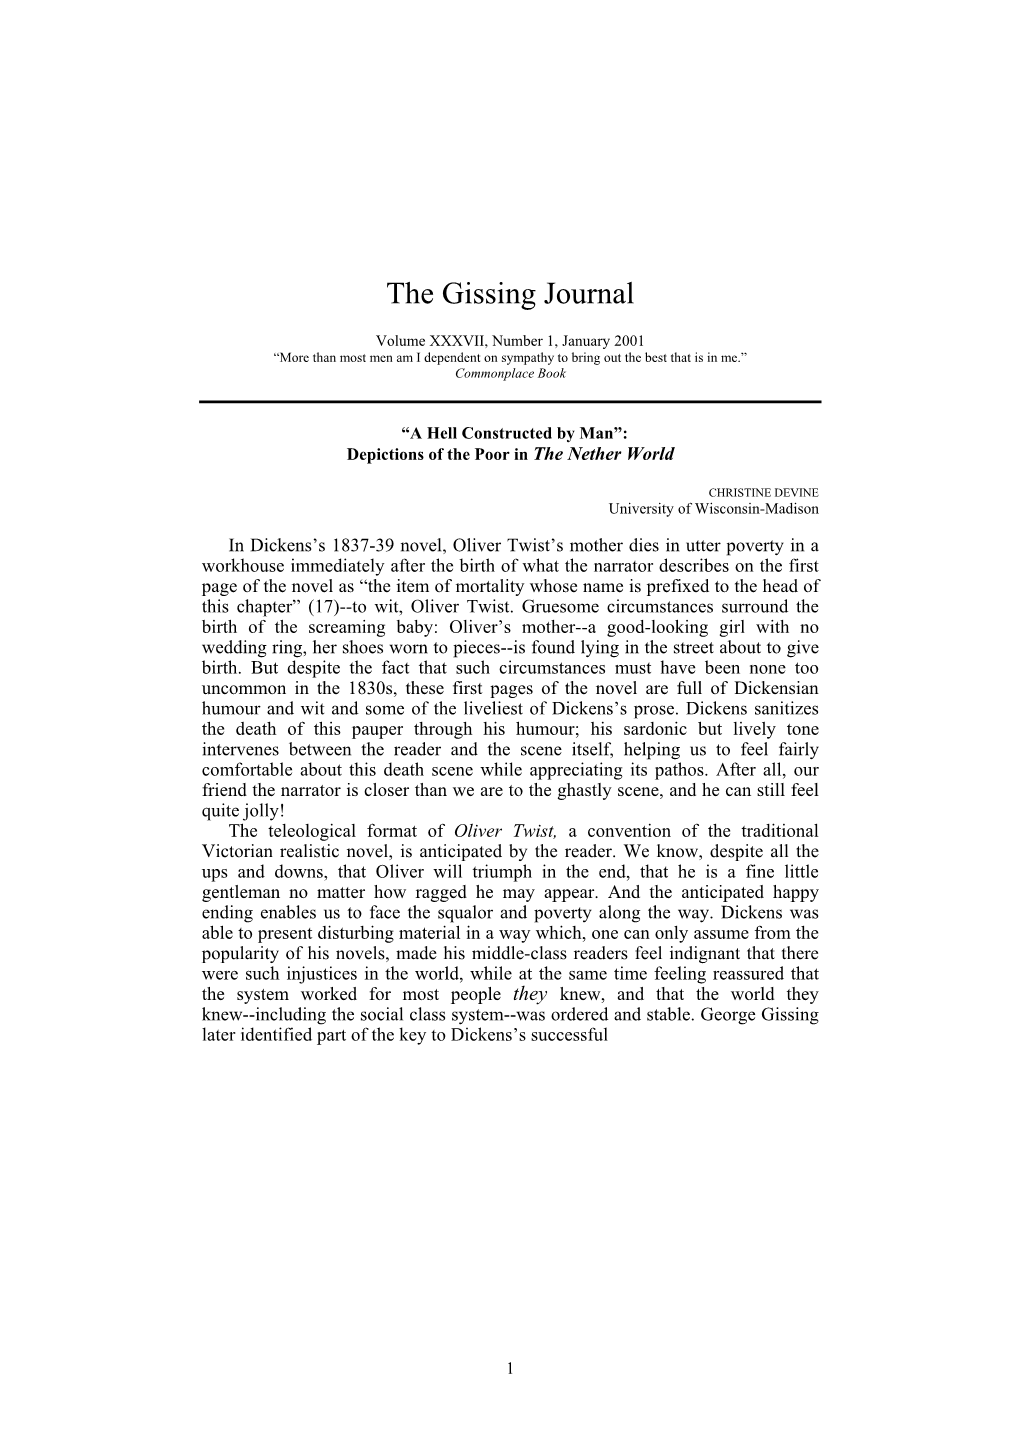 The Gissing Journal